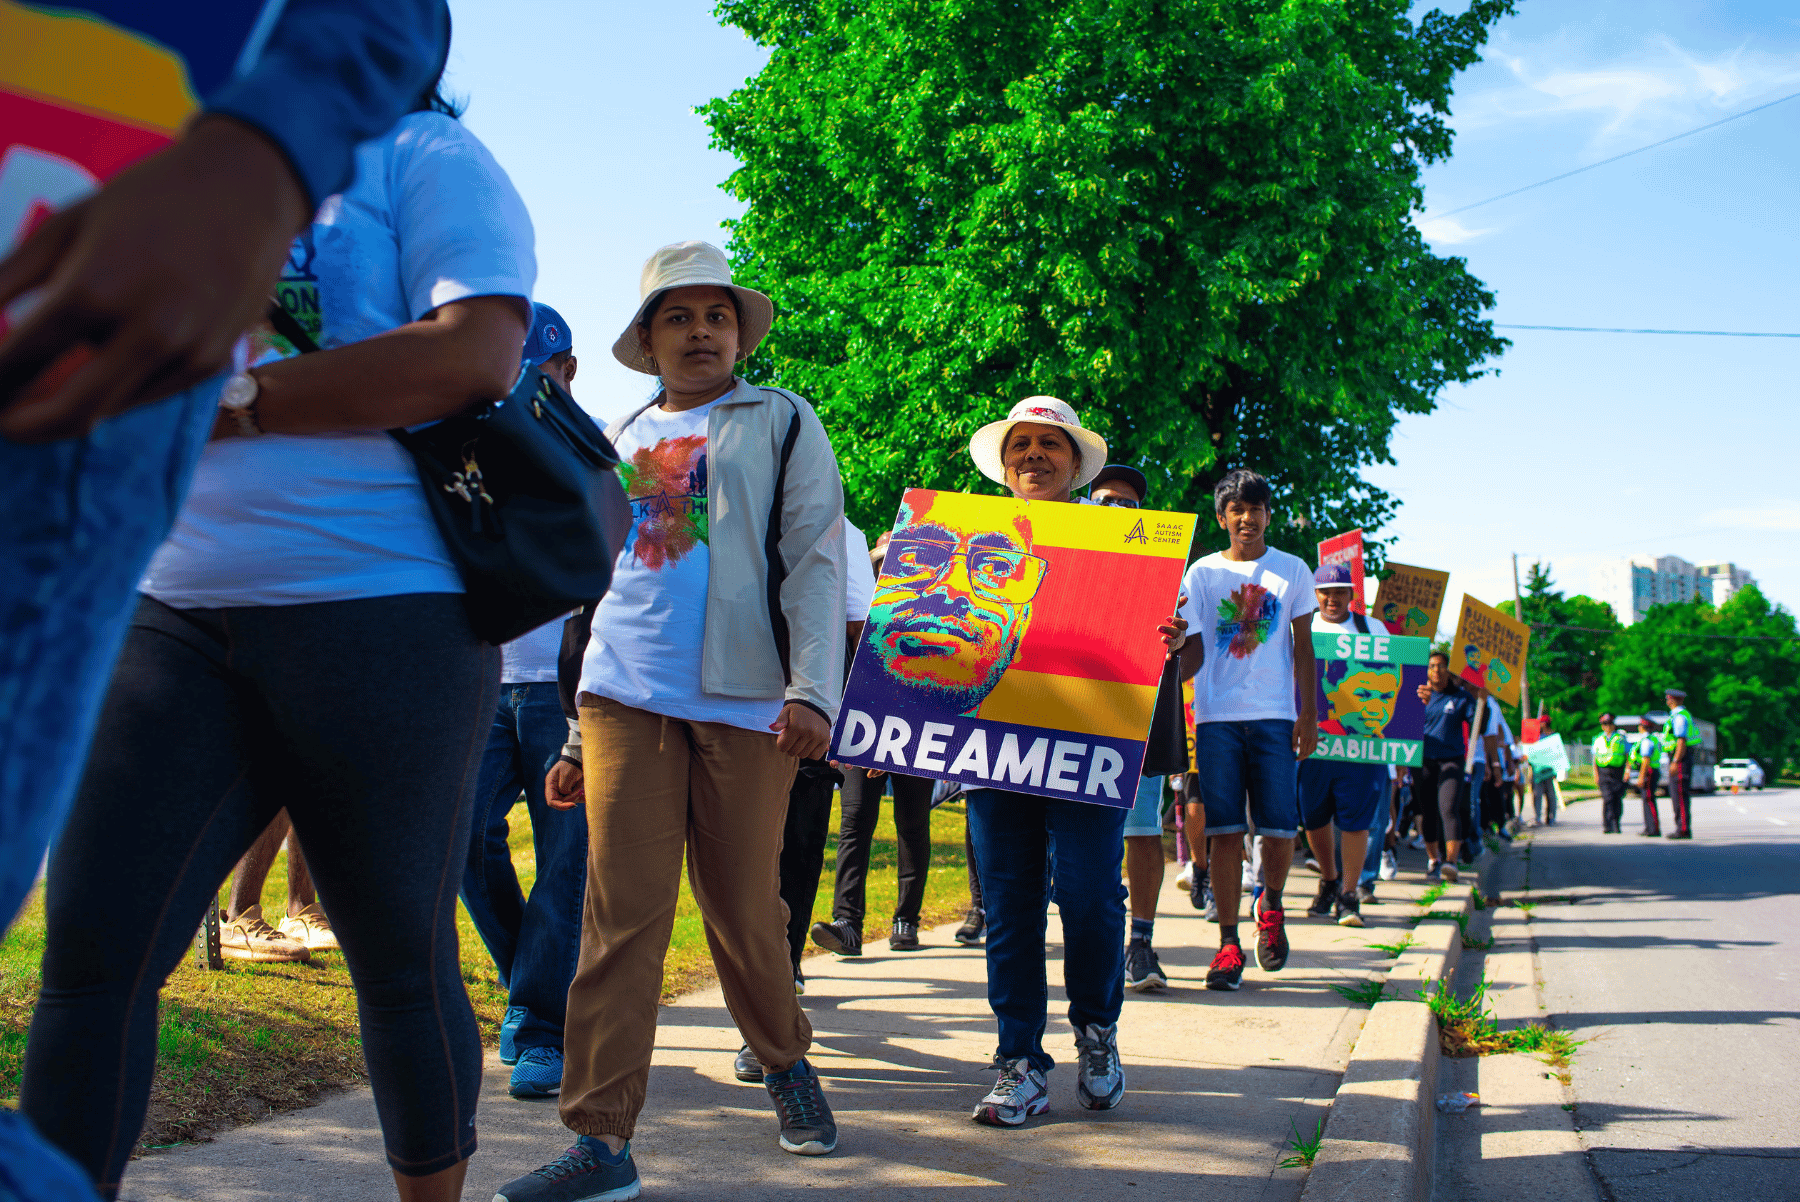 people walking towards camera during the walk-a-thon event. a lady with hat is holding a sign that reads "dreamer"